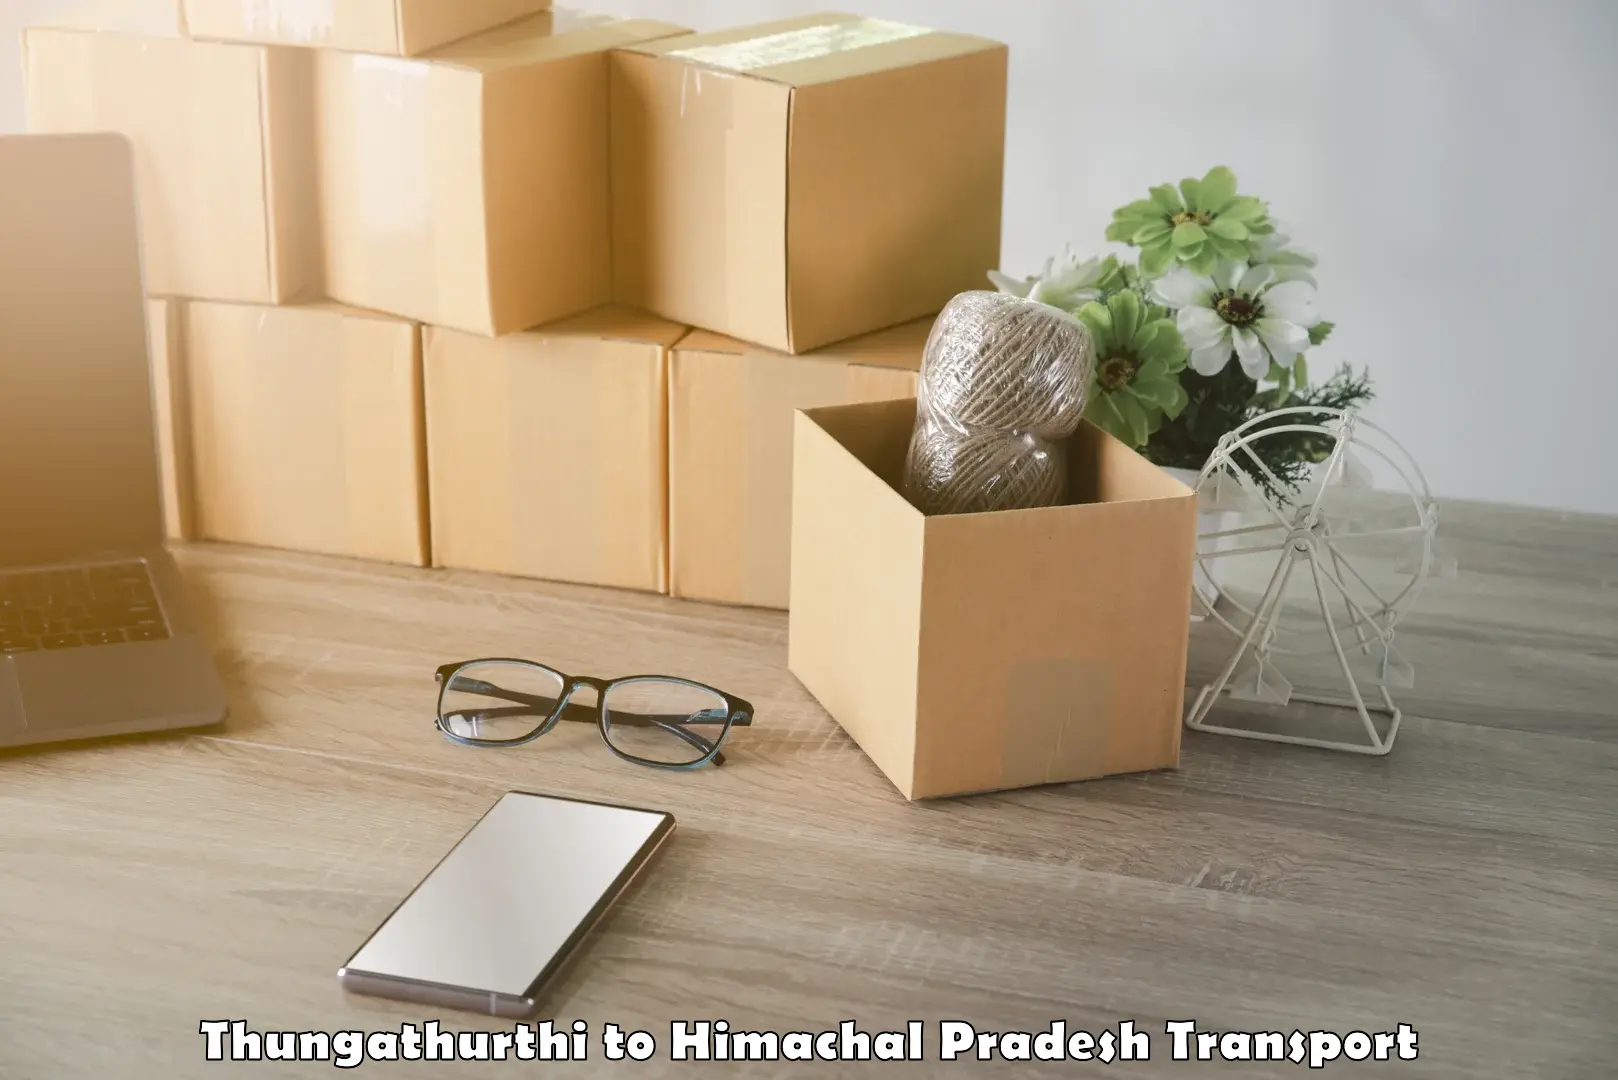 Truck transport companies in India Thungathurthi to Dheera